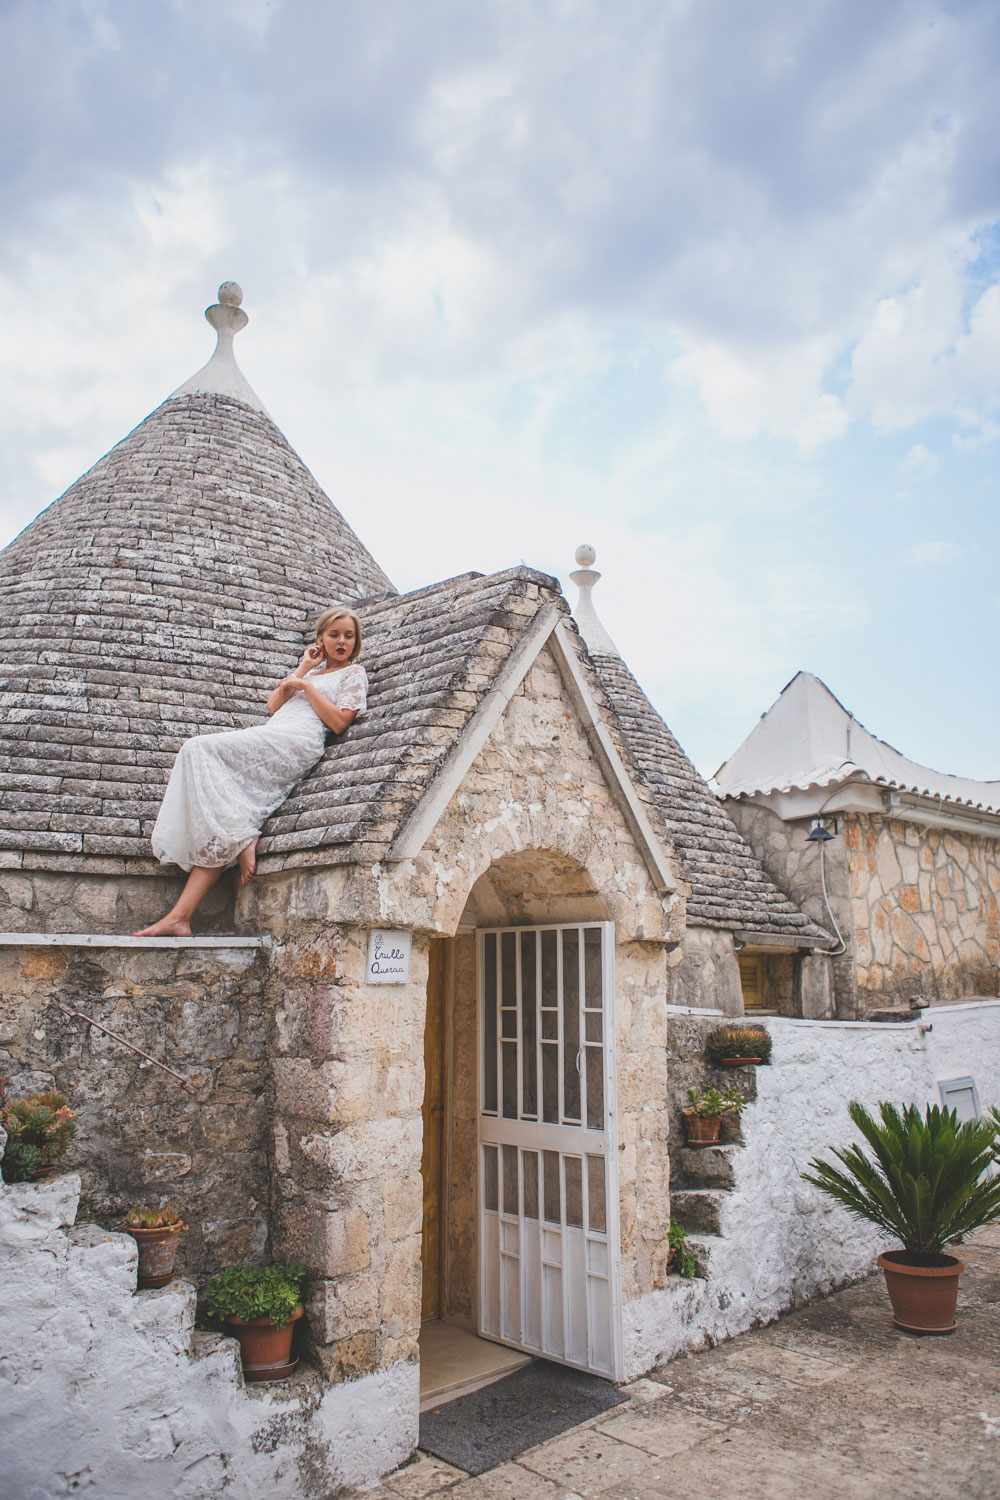 darya-kamalova-thecablook-fashion-lifestyle-blogger-from-thecablook-com-in-agri-trulli-in-puglia-south-italy-wearing-gat-rimon-white-maxi-lace-dress-4106